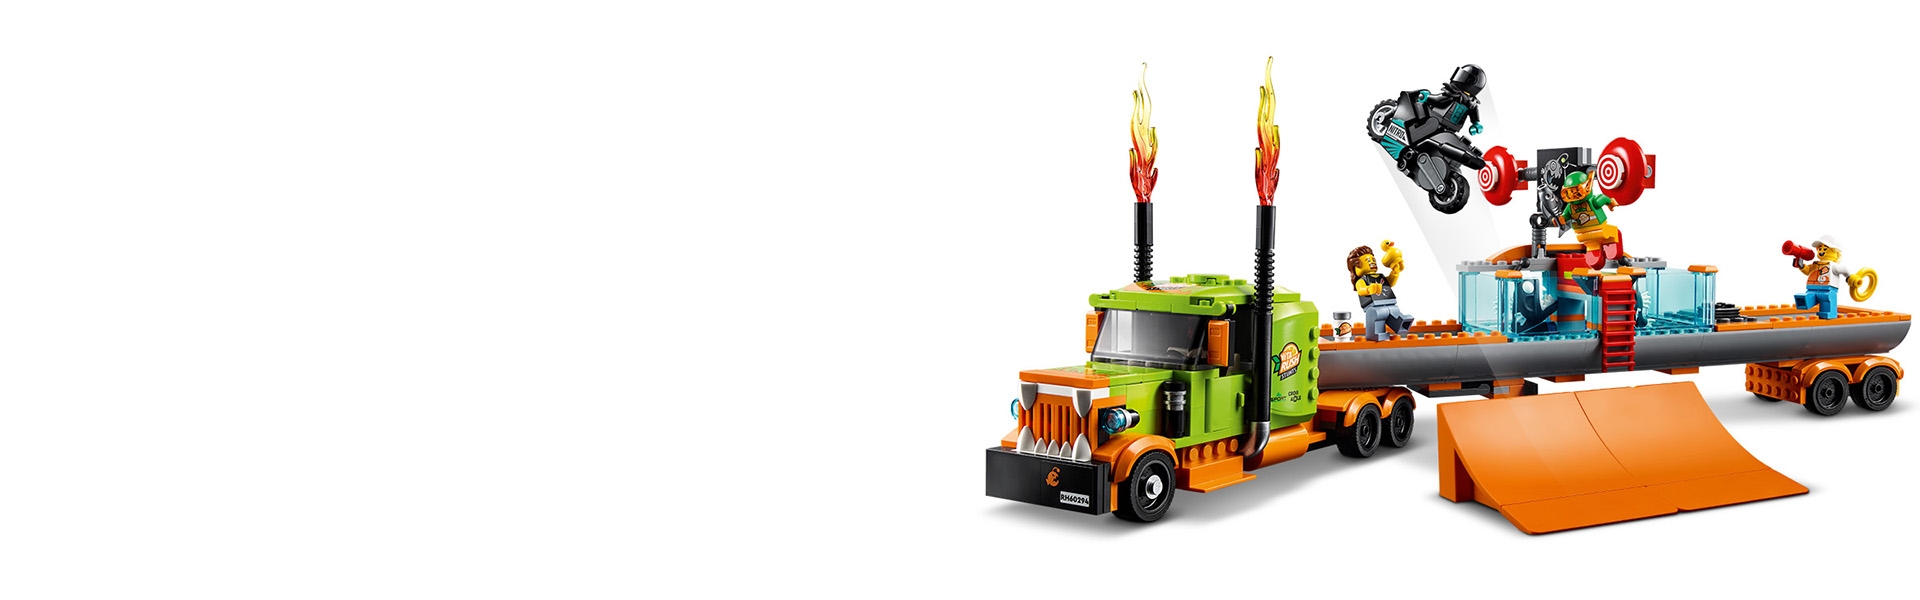 Stunt Show Truck 60294 | City | Buy online at the Official LEGO® Shop US